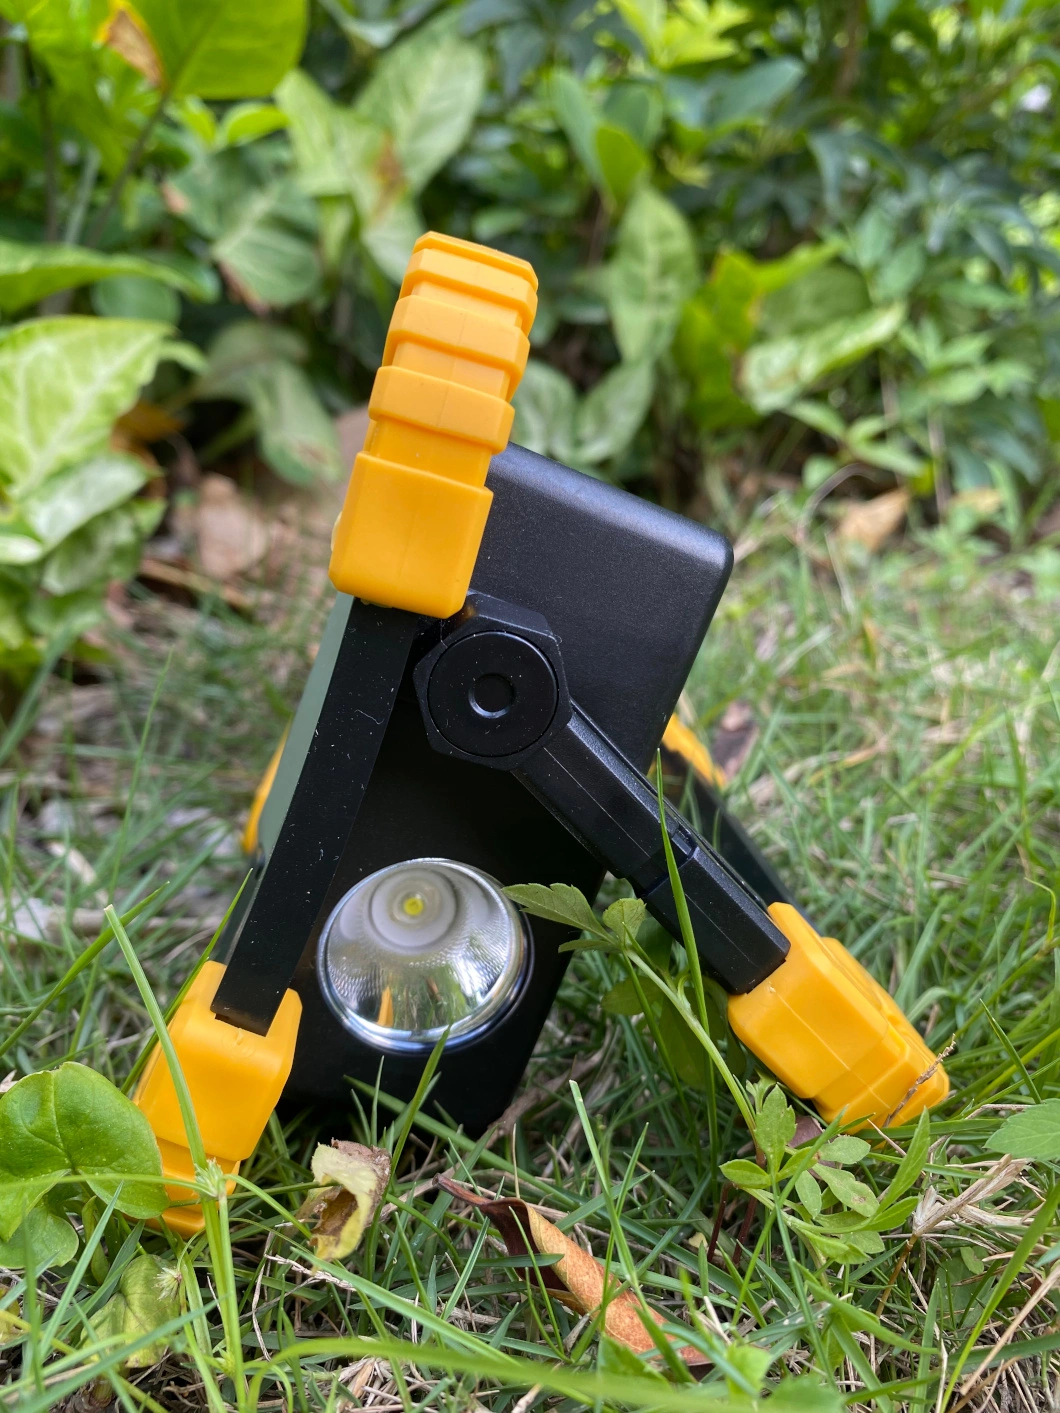 USB Rechargeable Three Colors Water Proof LED Outdoor Camping Searching Work Light Lamp COB Big Flood Beam Light